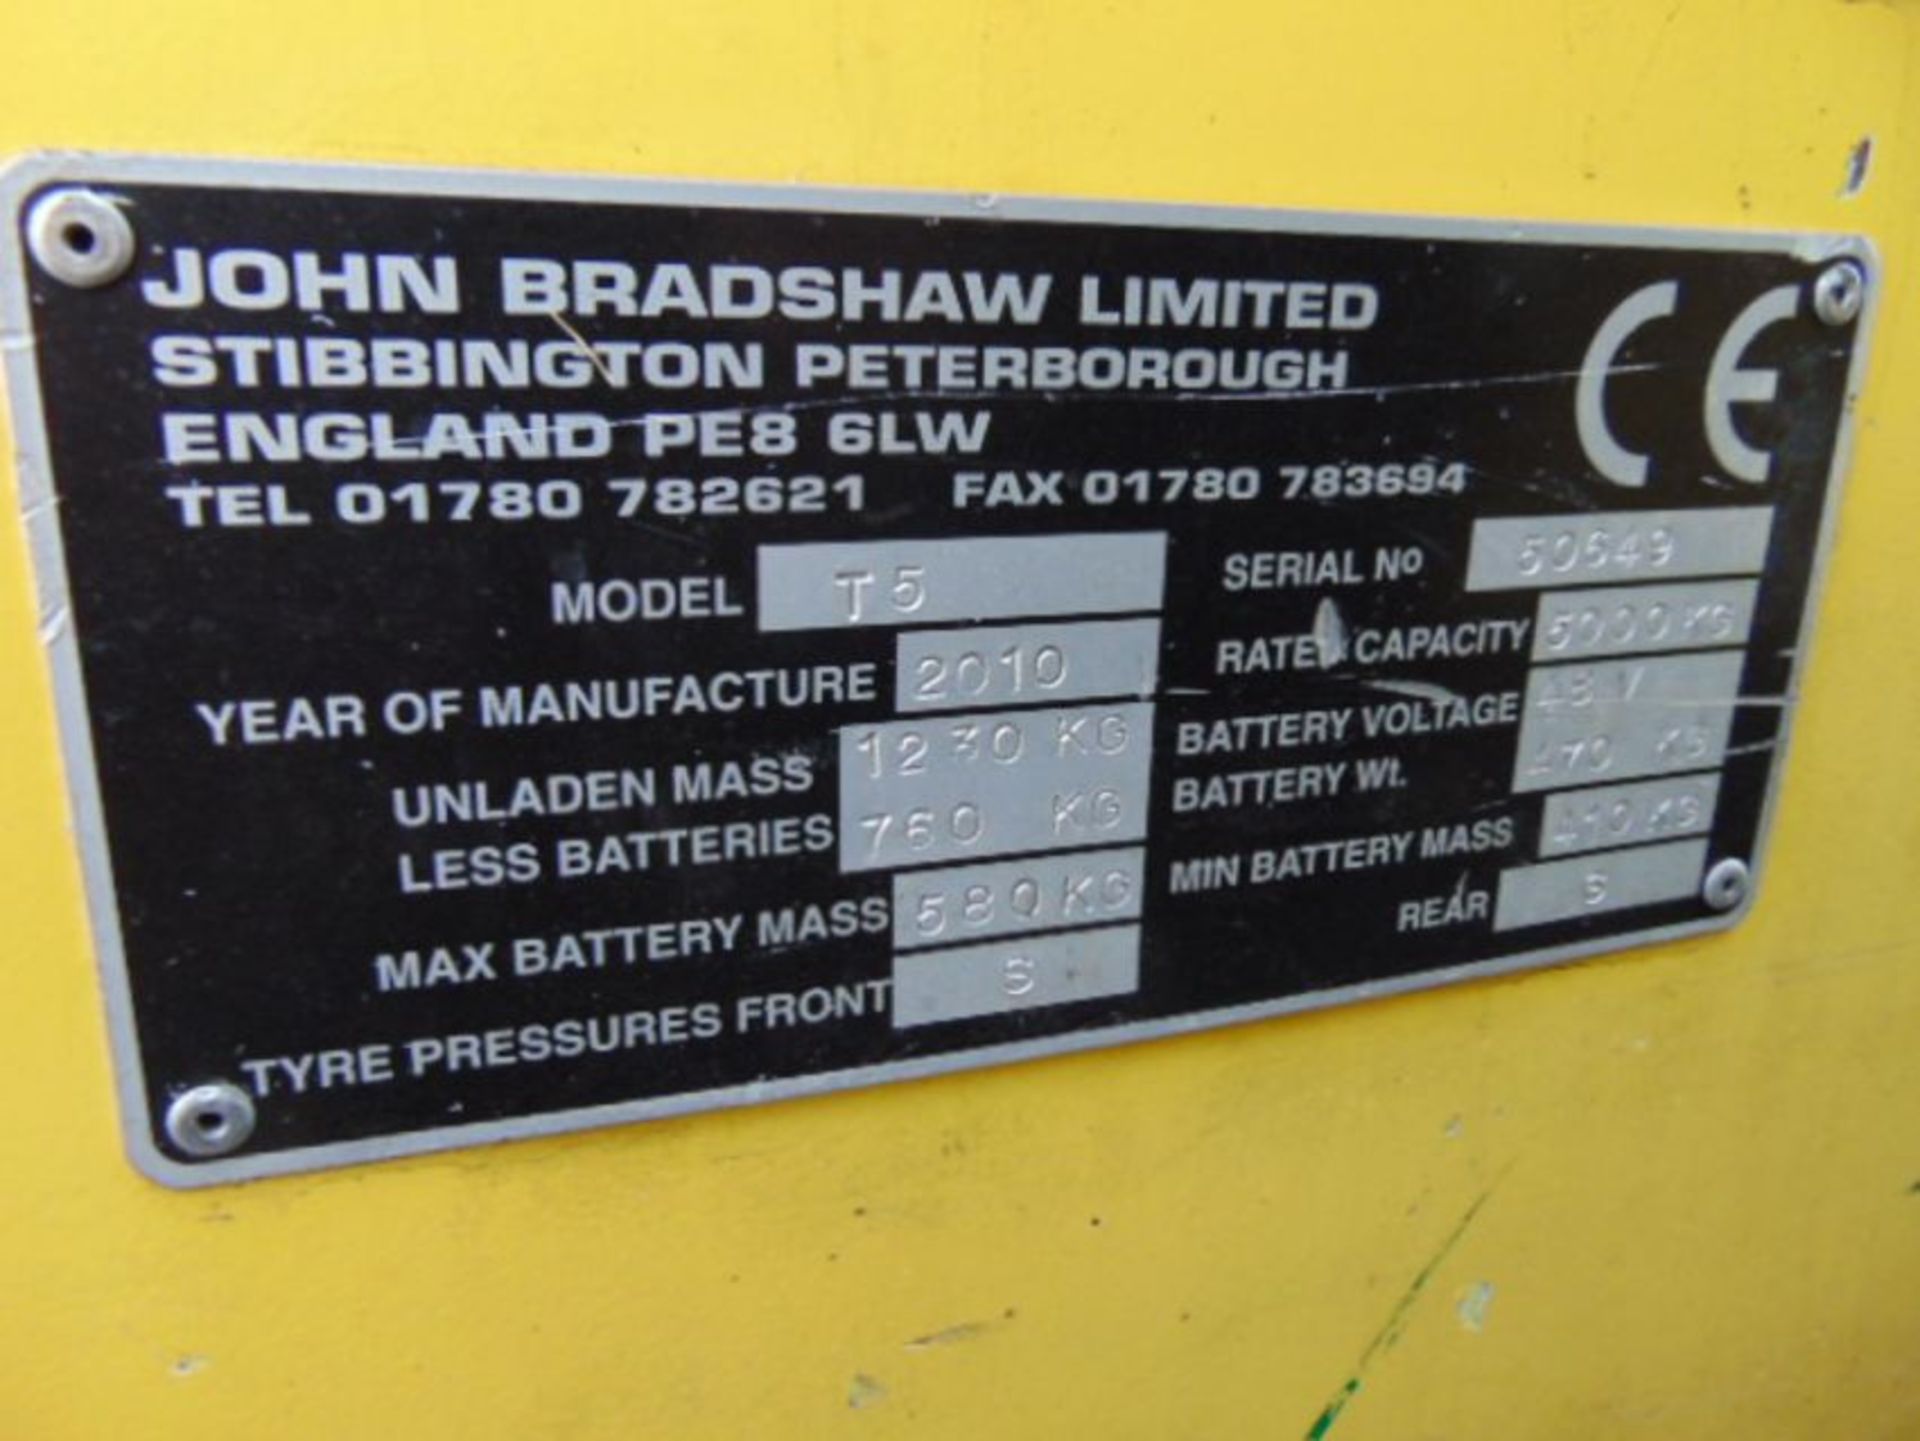 2010 Bradshaw T5 5000Kg Electric Tow Tractor c/w Battery Charger - Image 12 of 13